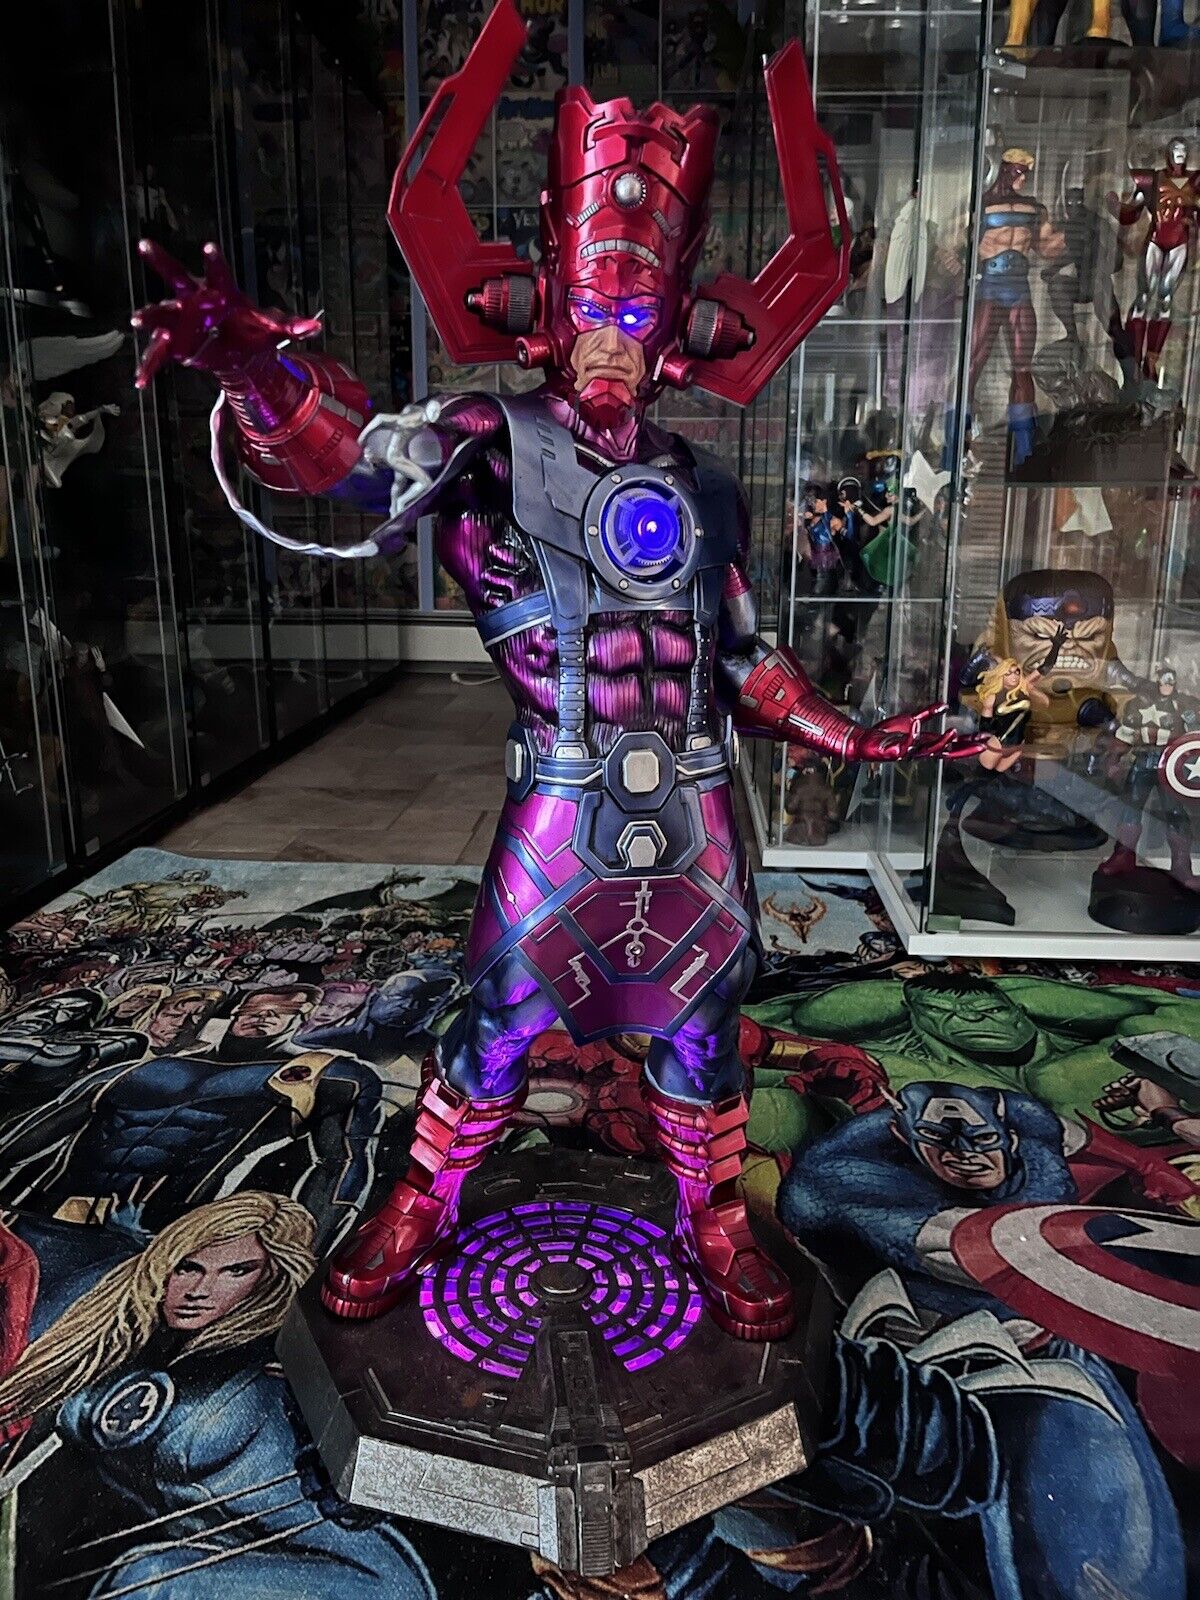 Sideshow 2013 Galactus Maquette With Exclusive Light Up Feature.